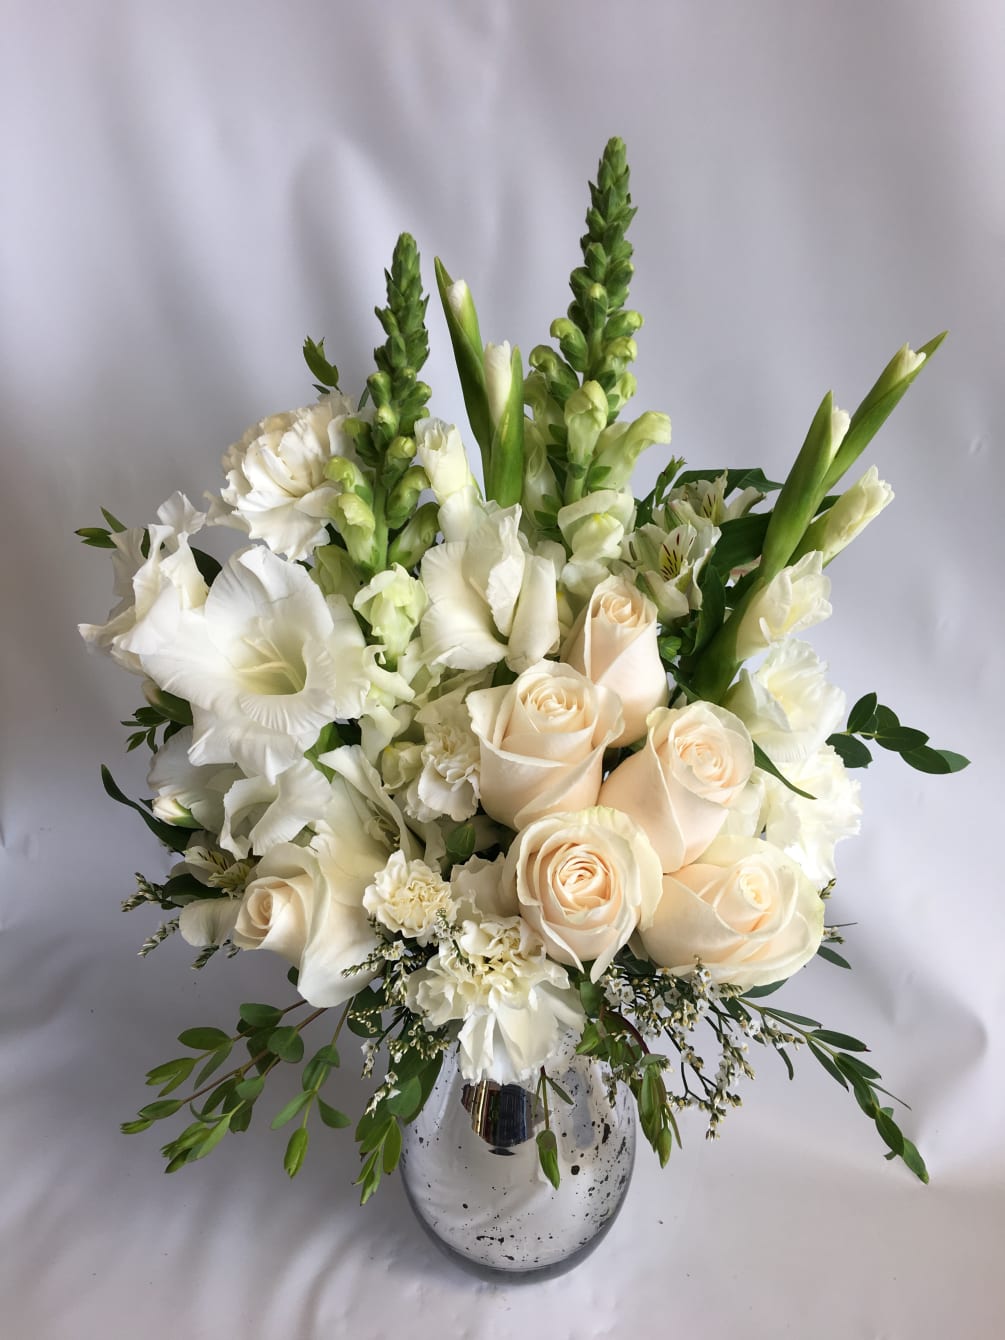 Day or night, this arrangement is guaranteed to shine the room with